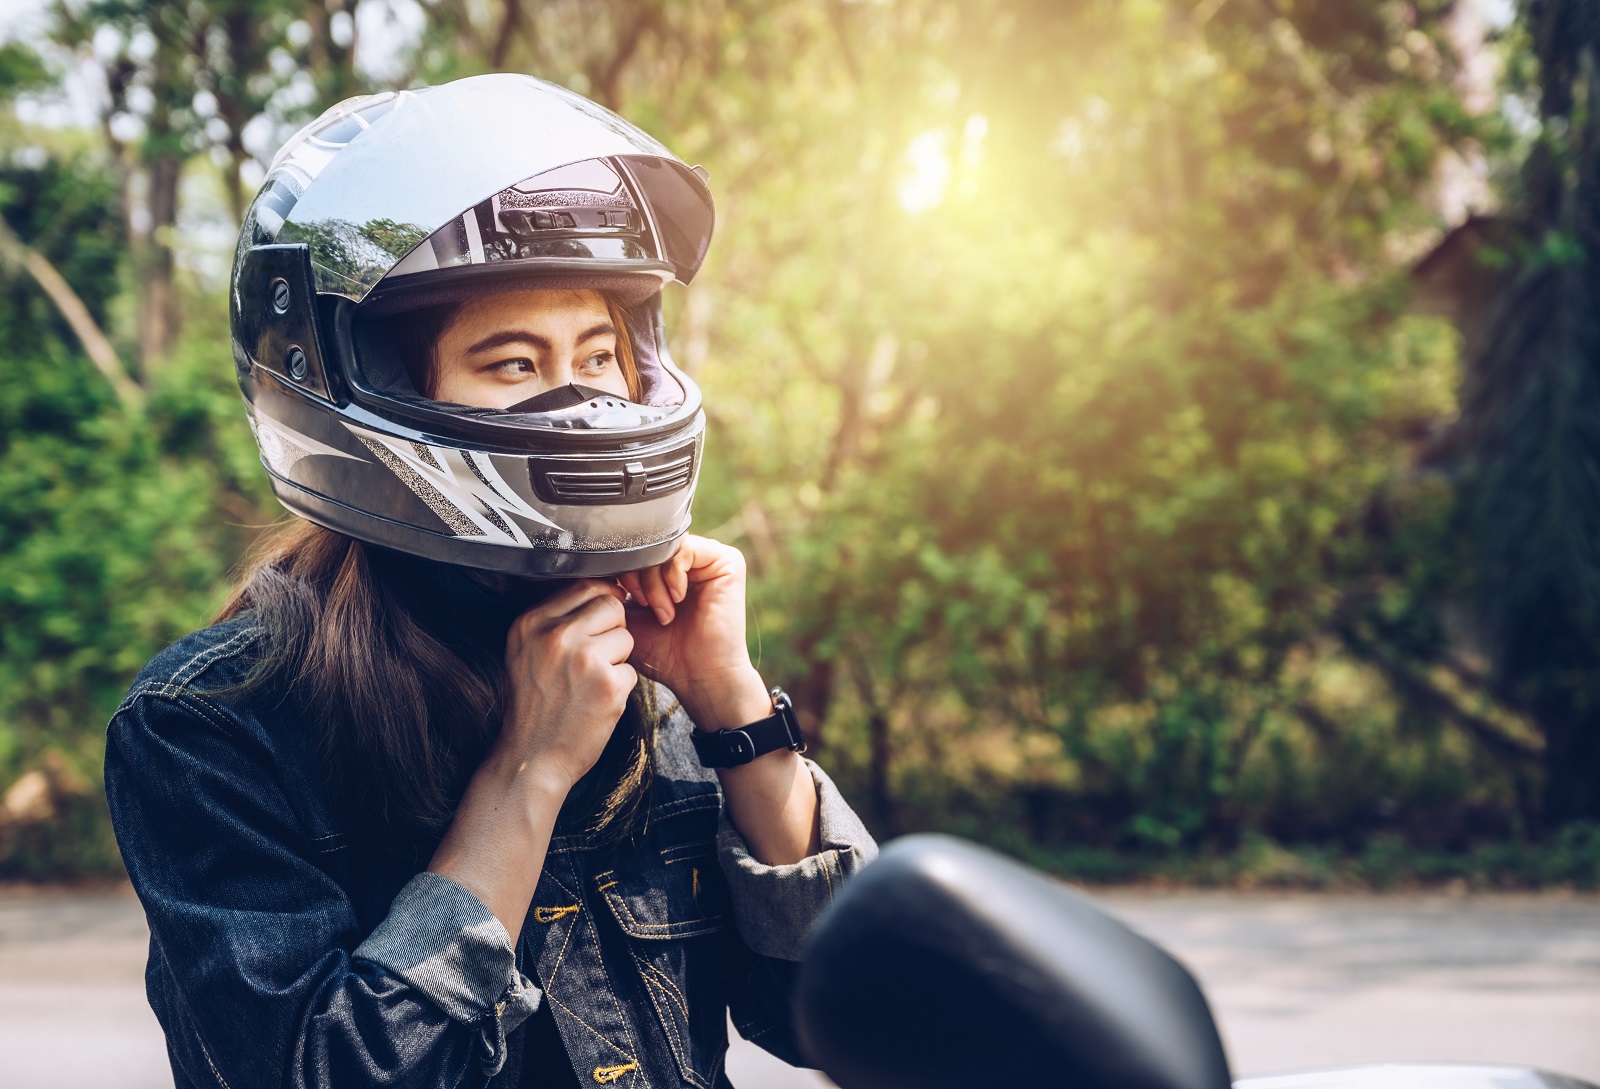 <p class="wp-caption-text">Image Credit: Shutterstock / Boyloso</p>  <p><span>A helmet is the most crucial piece of motorcycle gear. It protects your head in the event of a crash, significantly reducing the risk of fatal injuries. Always choose a DOT or SNELL certified helmet for optimal safety.</span></p>